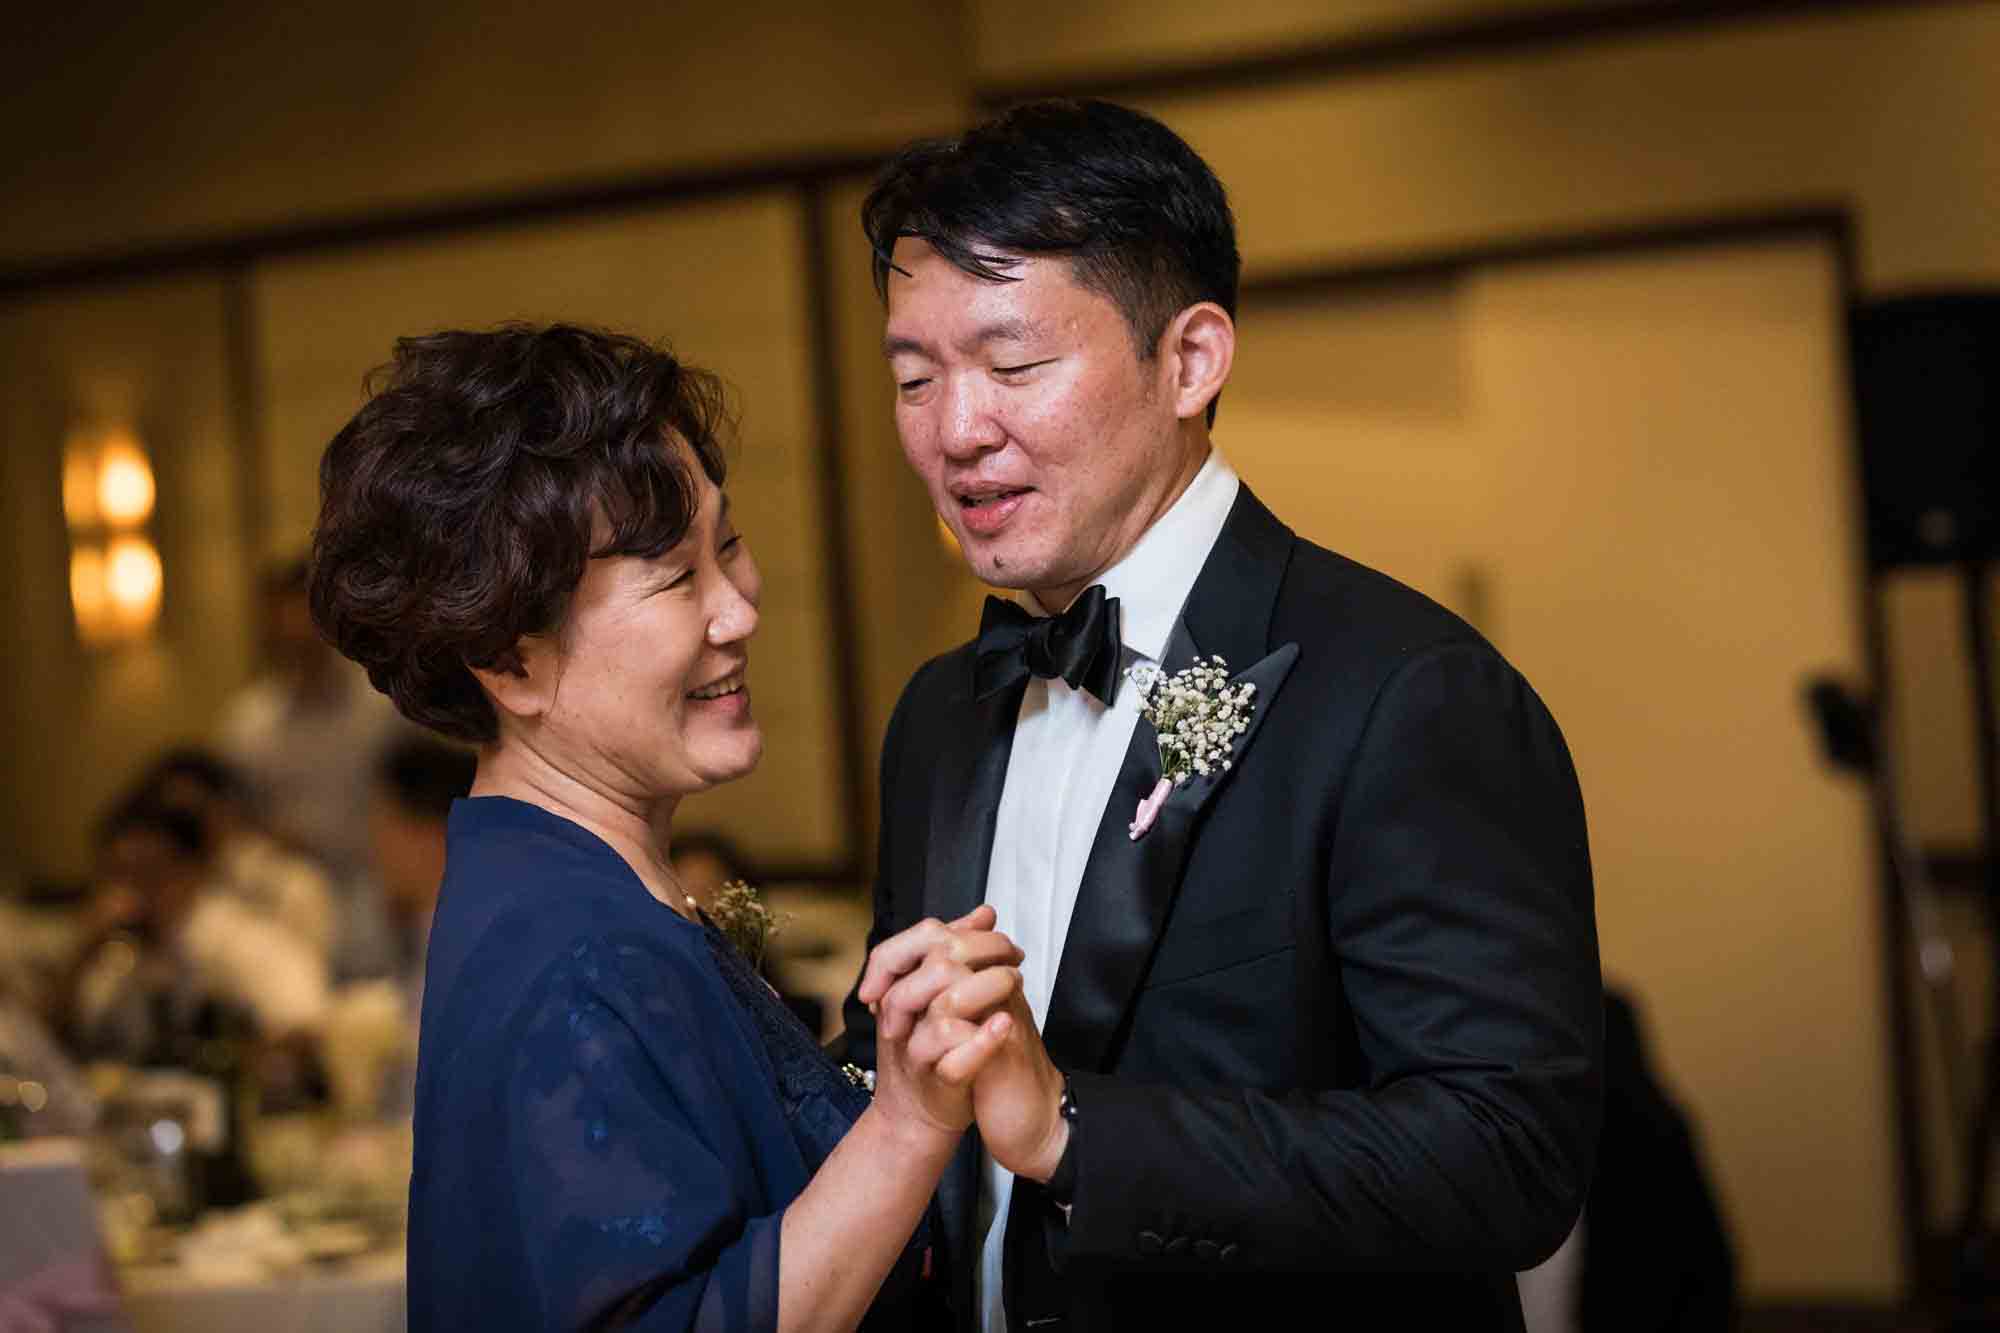 Groom dancing with mother wearing navy dress at a Sheraton LaGuardia East Hotel wedding